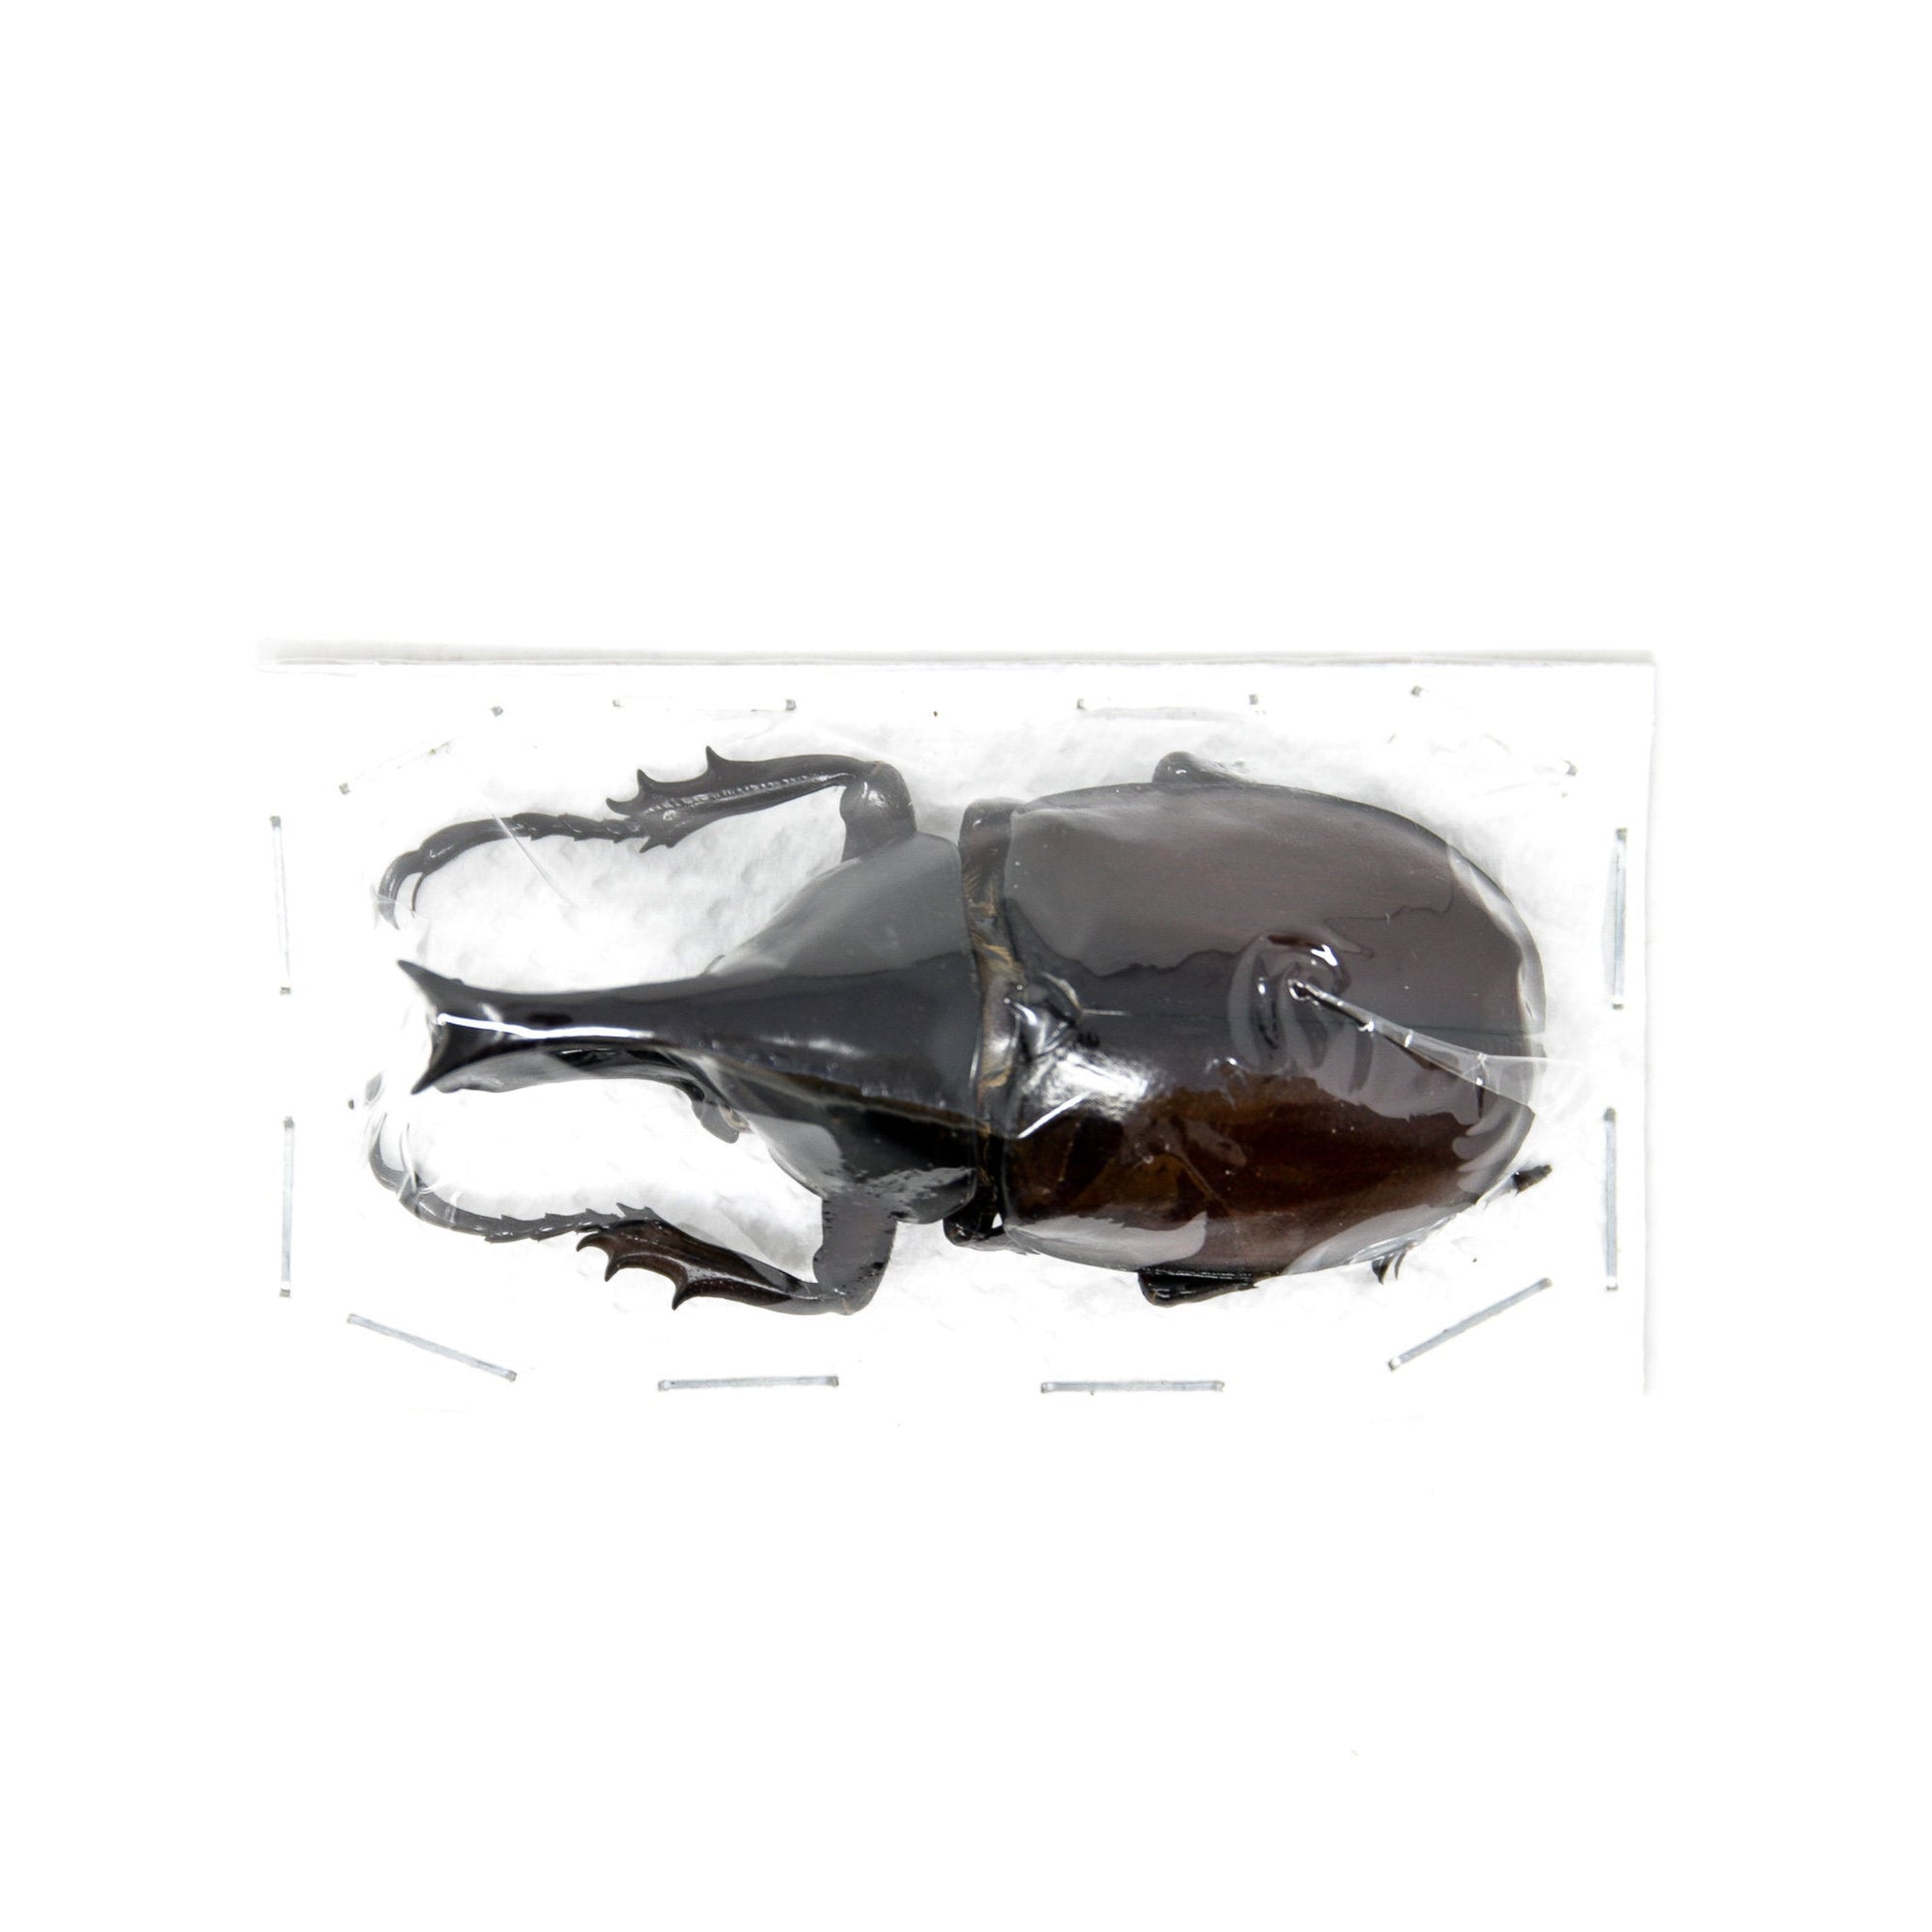 10 x Rhino Beetles, Xylotrupes gideon, Dry Taxidermy Insect Specimens for Entomology and Art